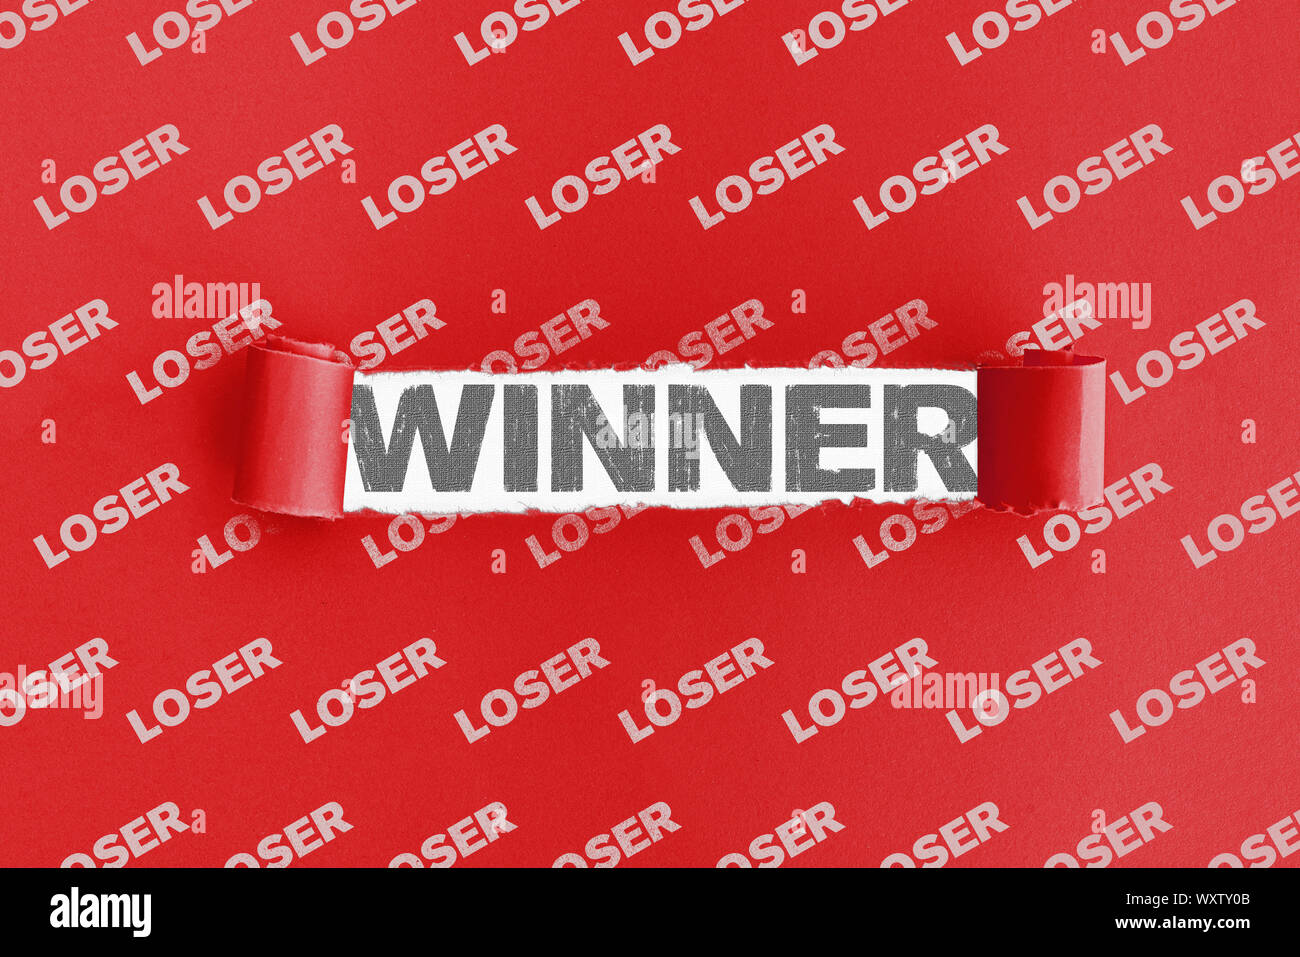 word LOSER on torn red paper with text WINNER in opening Stock Photo